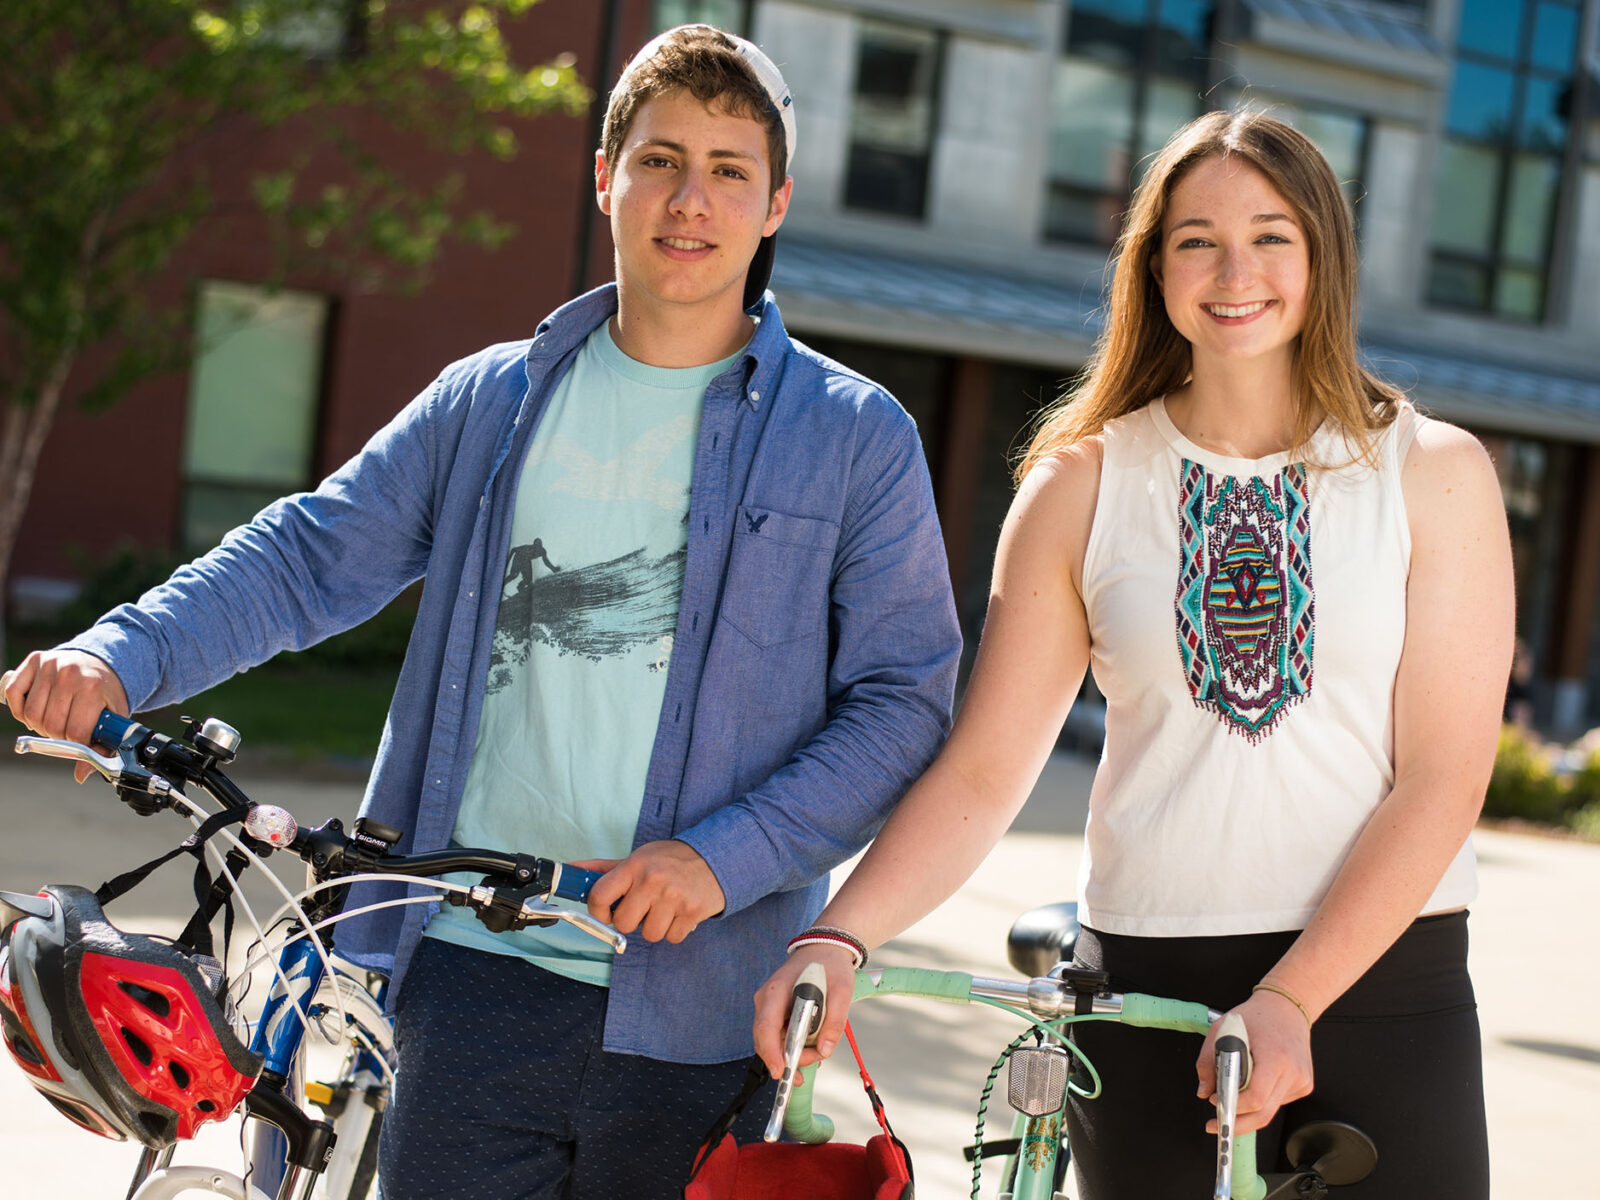 two students walking through campus with their bikes and smiling